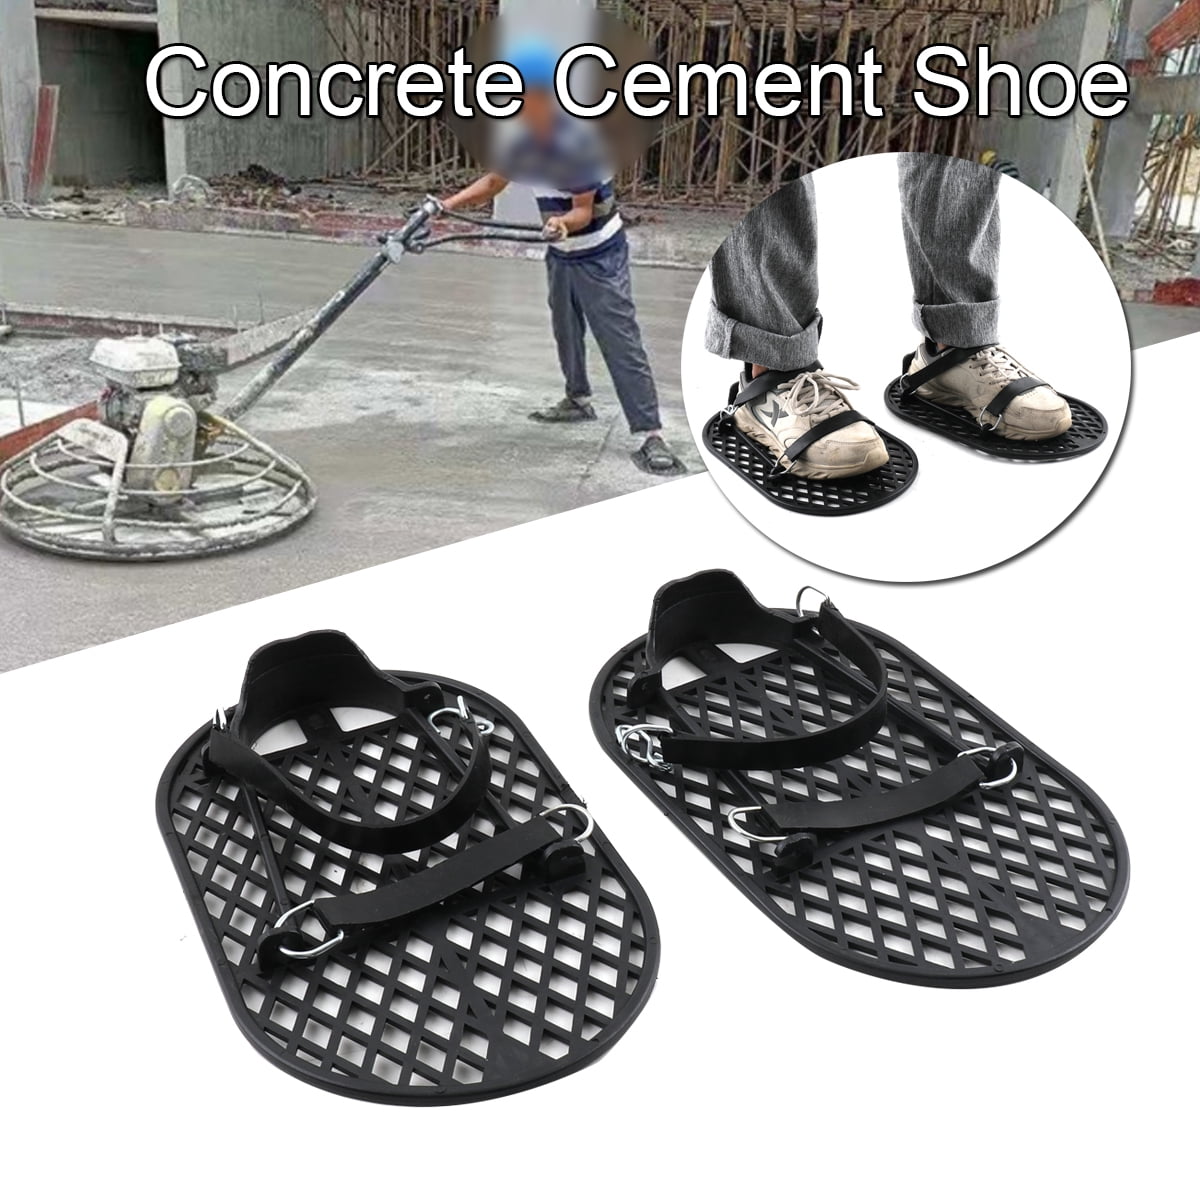 YILIKISS Concrete Cement Finishing Shoe Prevents Slippage ABS Engineering  Plastic Shoes 